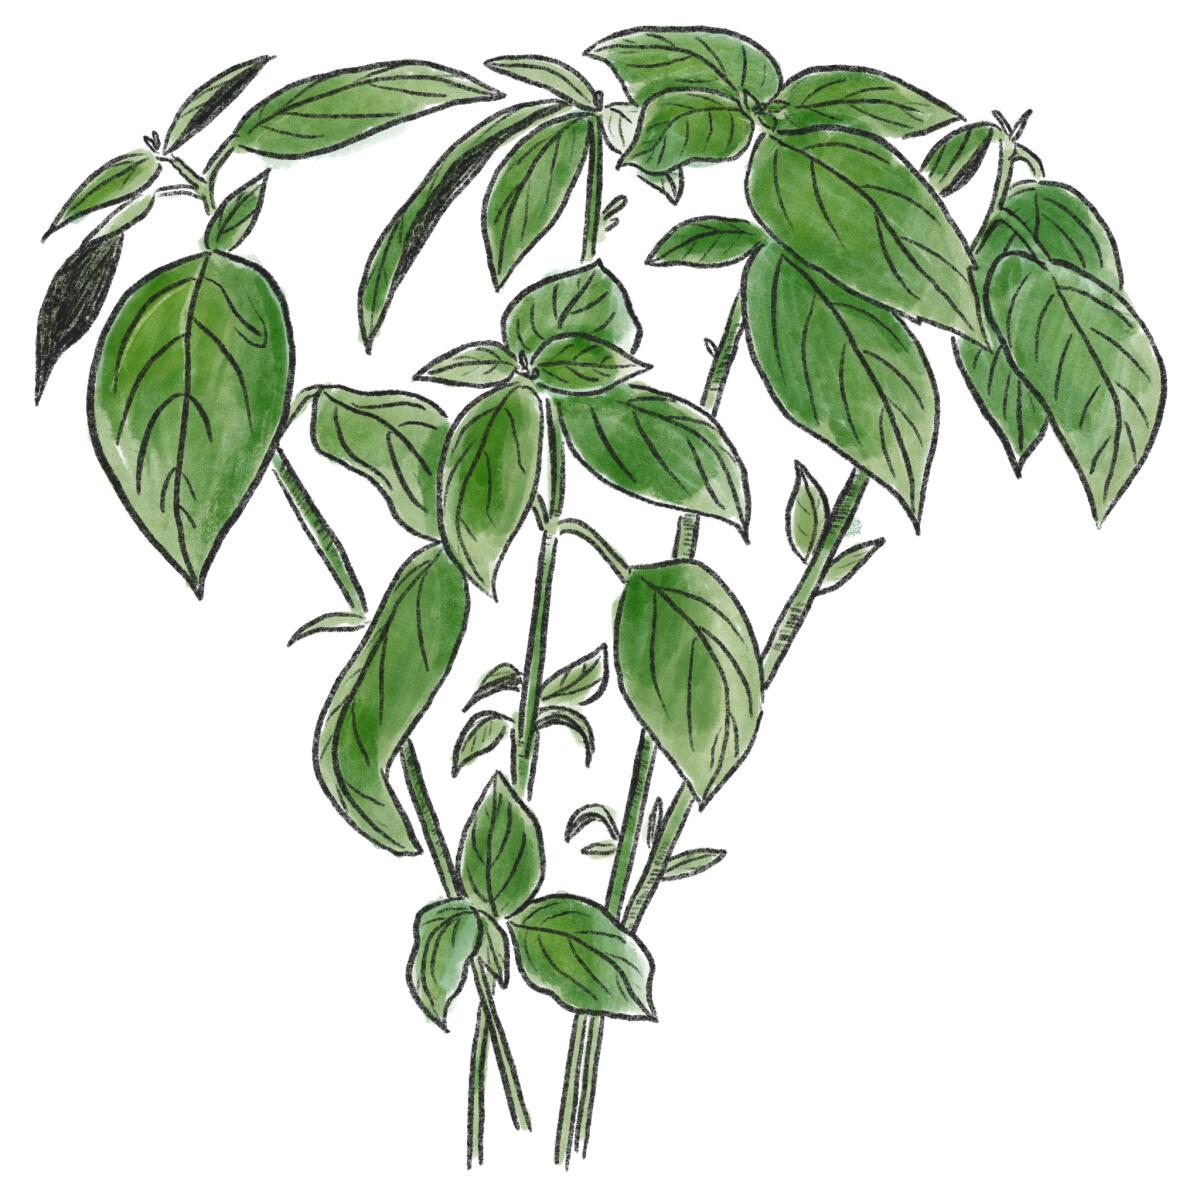 An illustration of a basil plant 